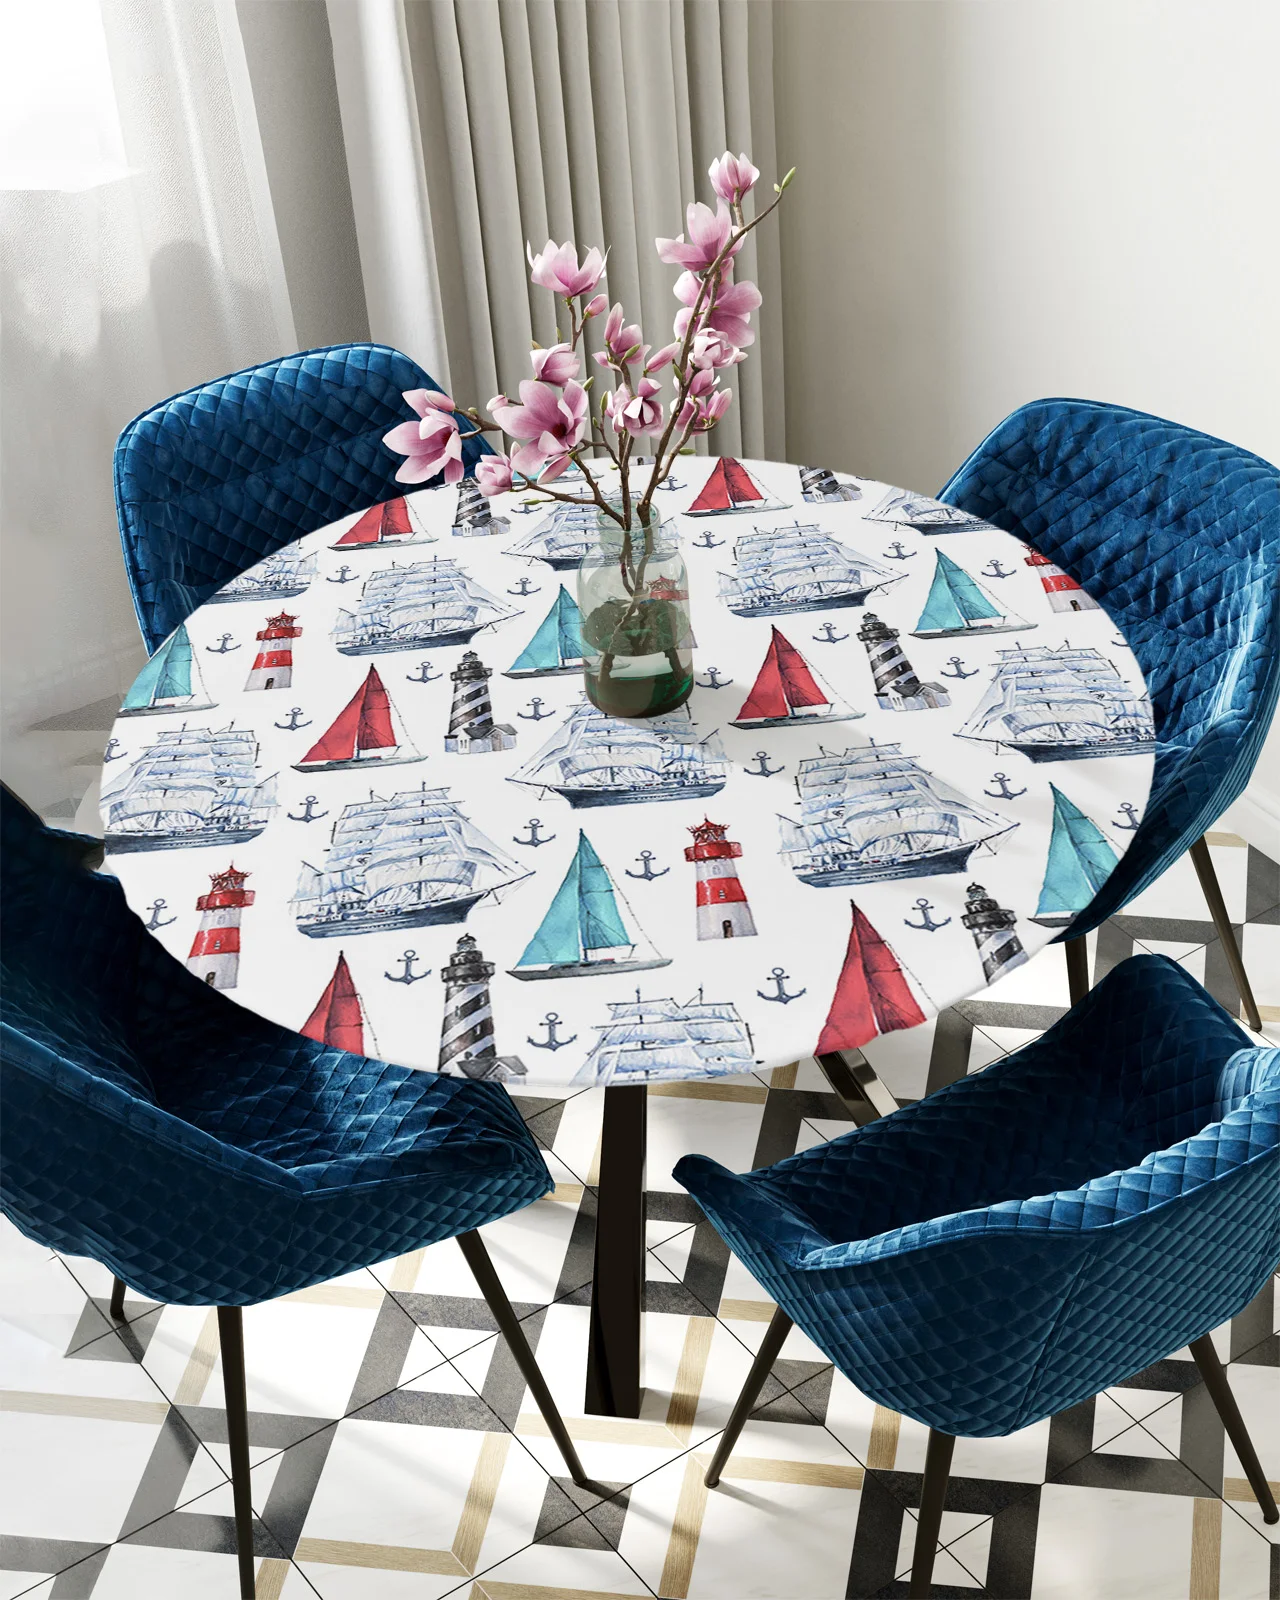 

Summer Ocean Sailing Lighthouse Round Rectangular Table Cover Waterproof Elastic Tablecloth For Kitchen Table Cloth Home Decor